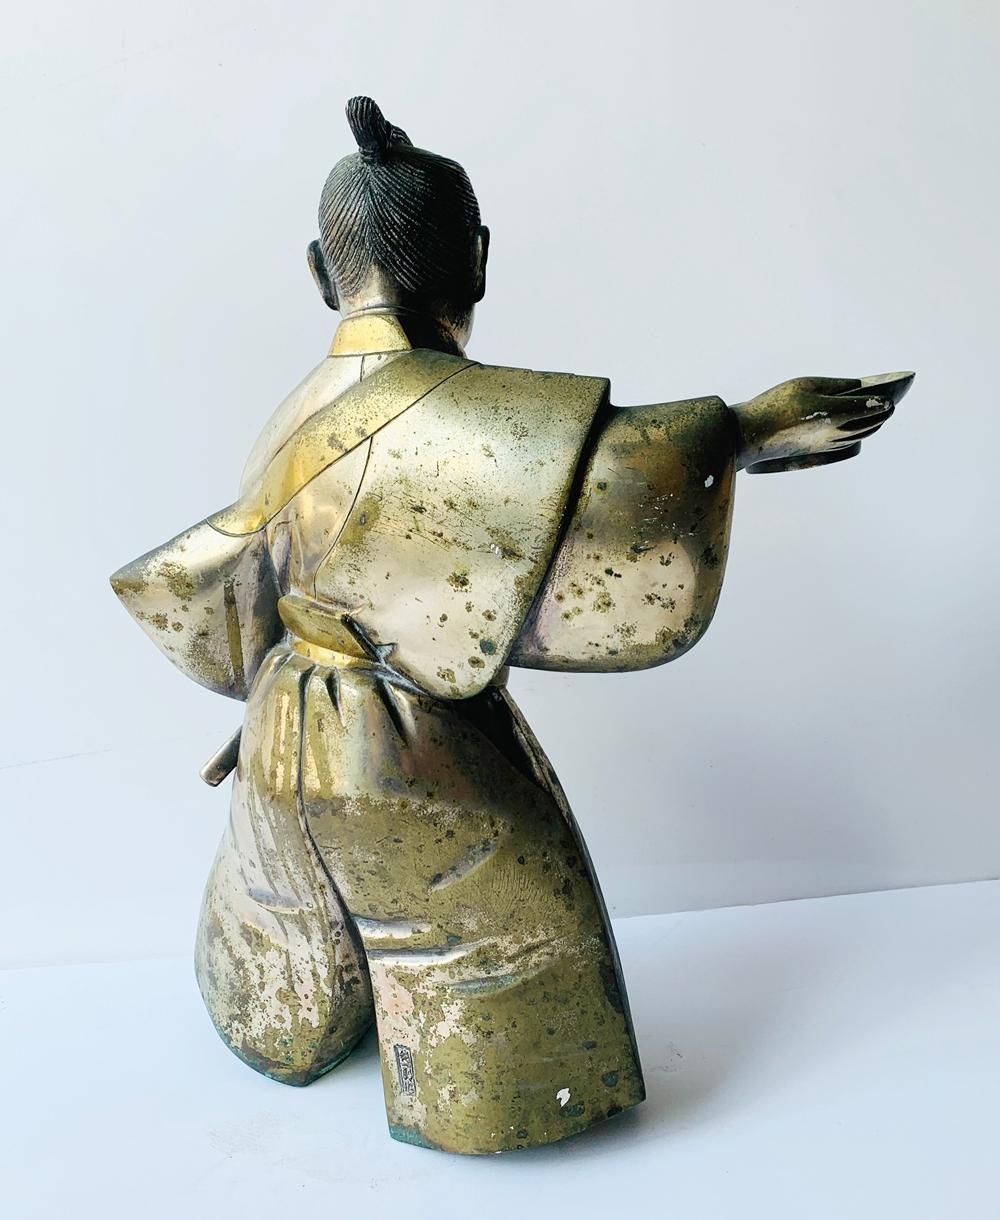 Stunning Japanese sculpture made in solid brass and titled THE ONE.

The sculpture shows great attention to detail, the brass has aged and has a verdigris patina towards the bottom of the sculpture.

Makers mark on the